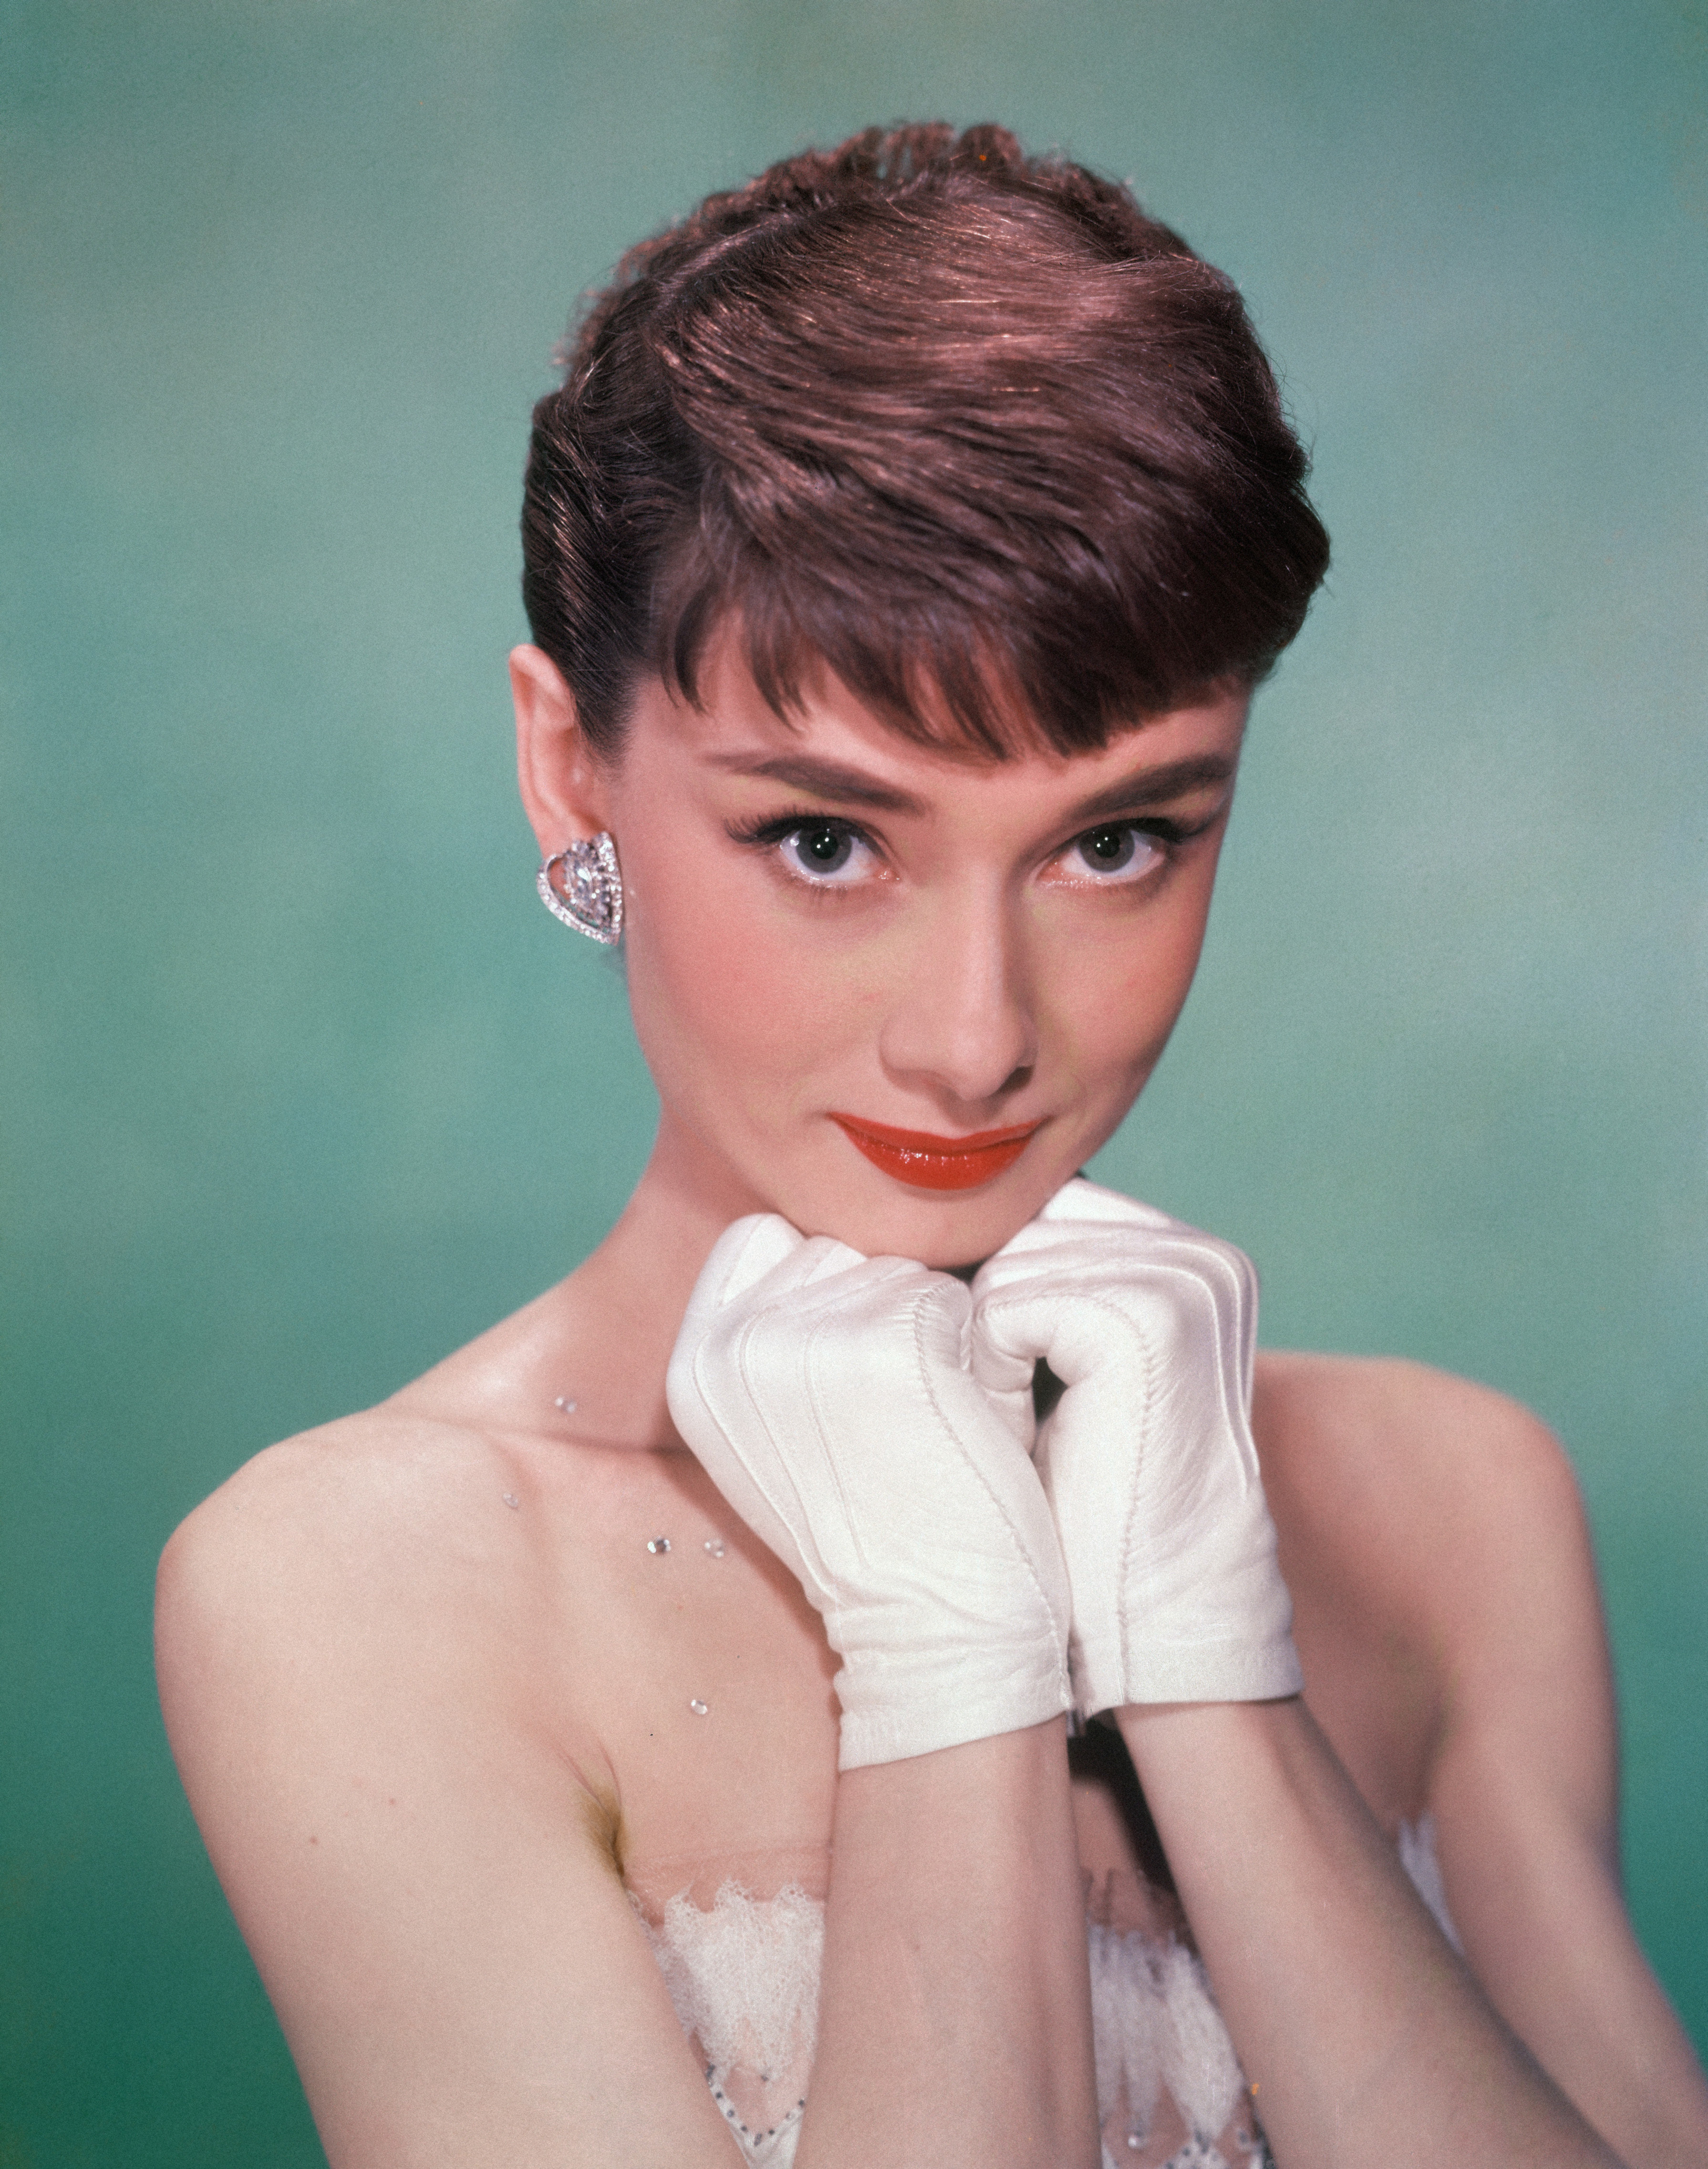 Hair Im Crushing On Audrey Tautous Incredibly Adorable Pixie Cut   Glamour